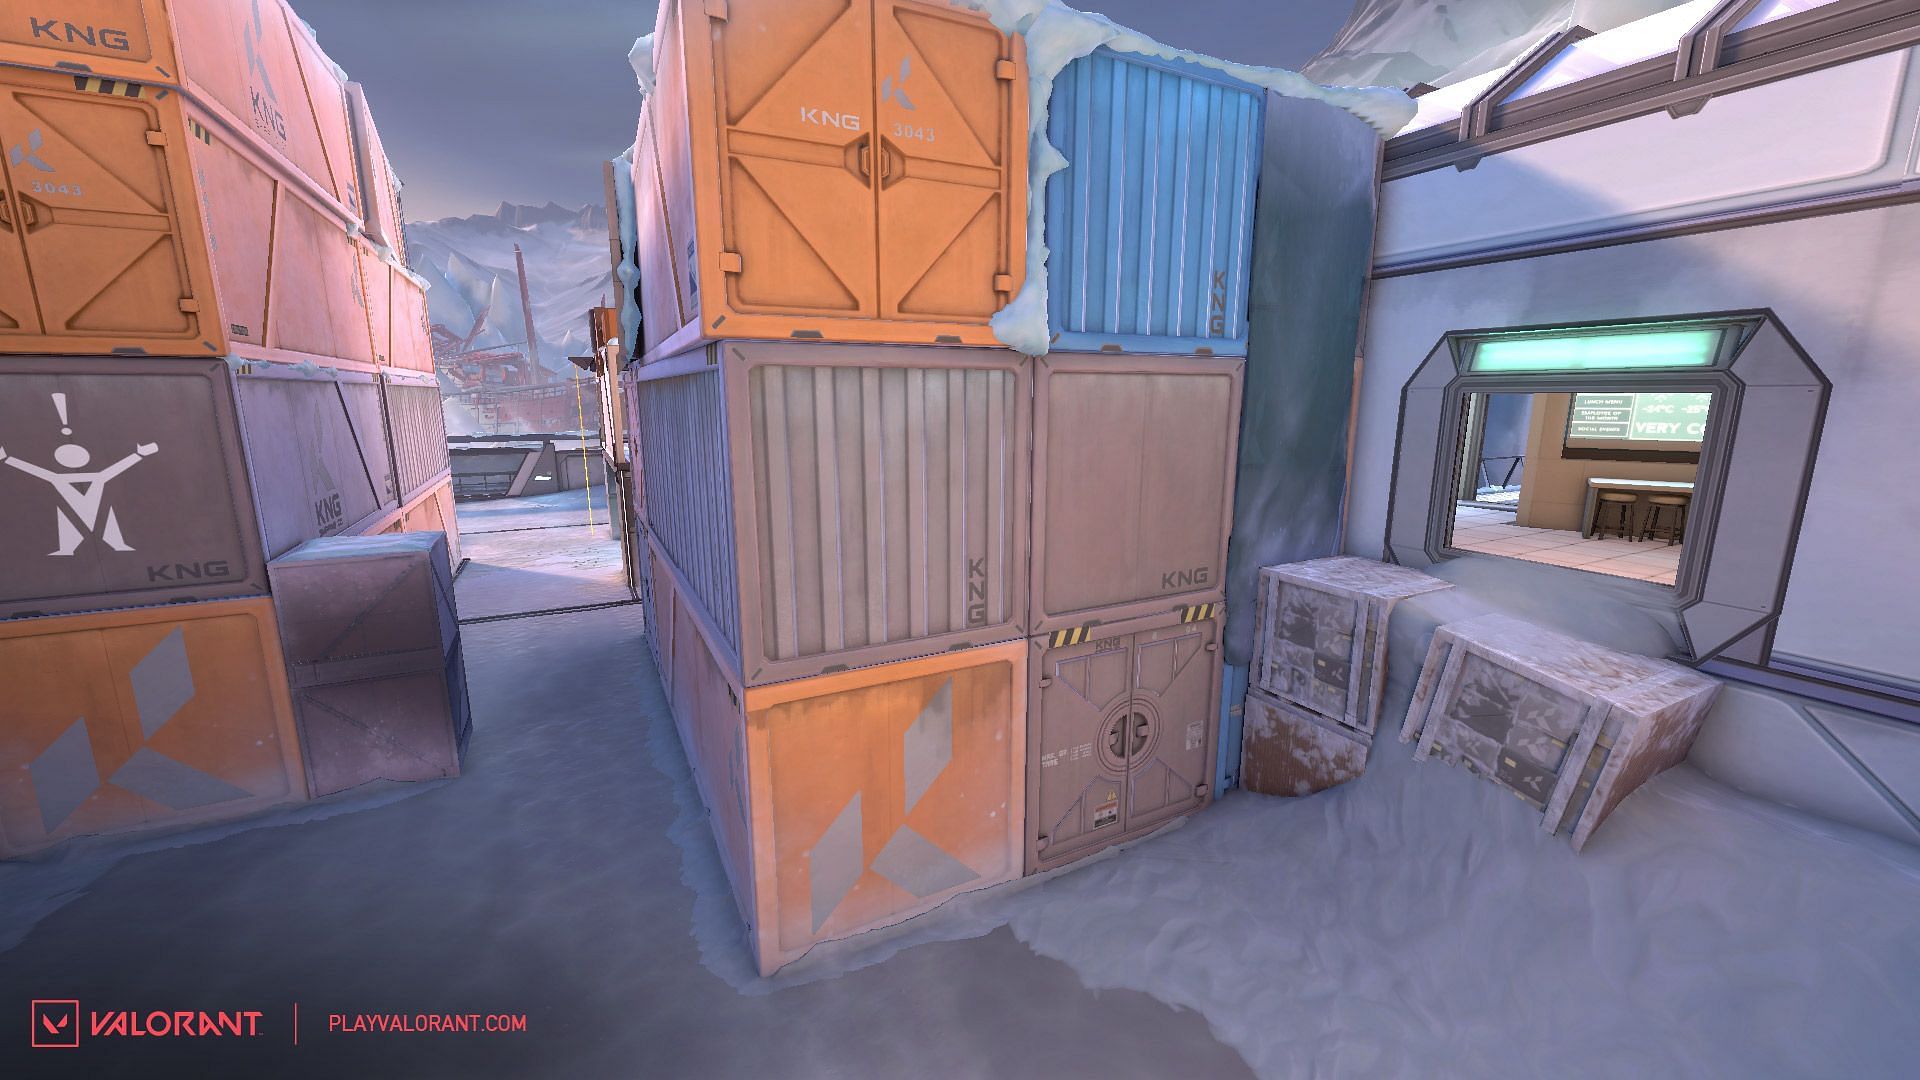 Icebox Snowpile - After (Image via Riot Games)